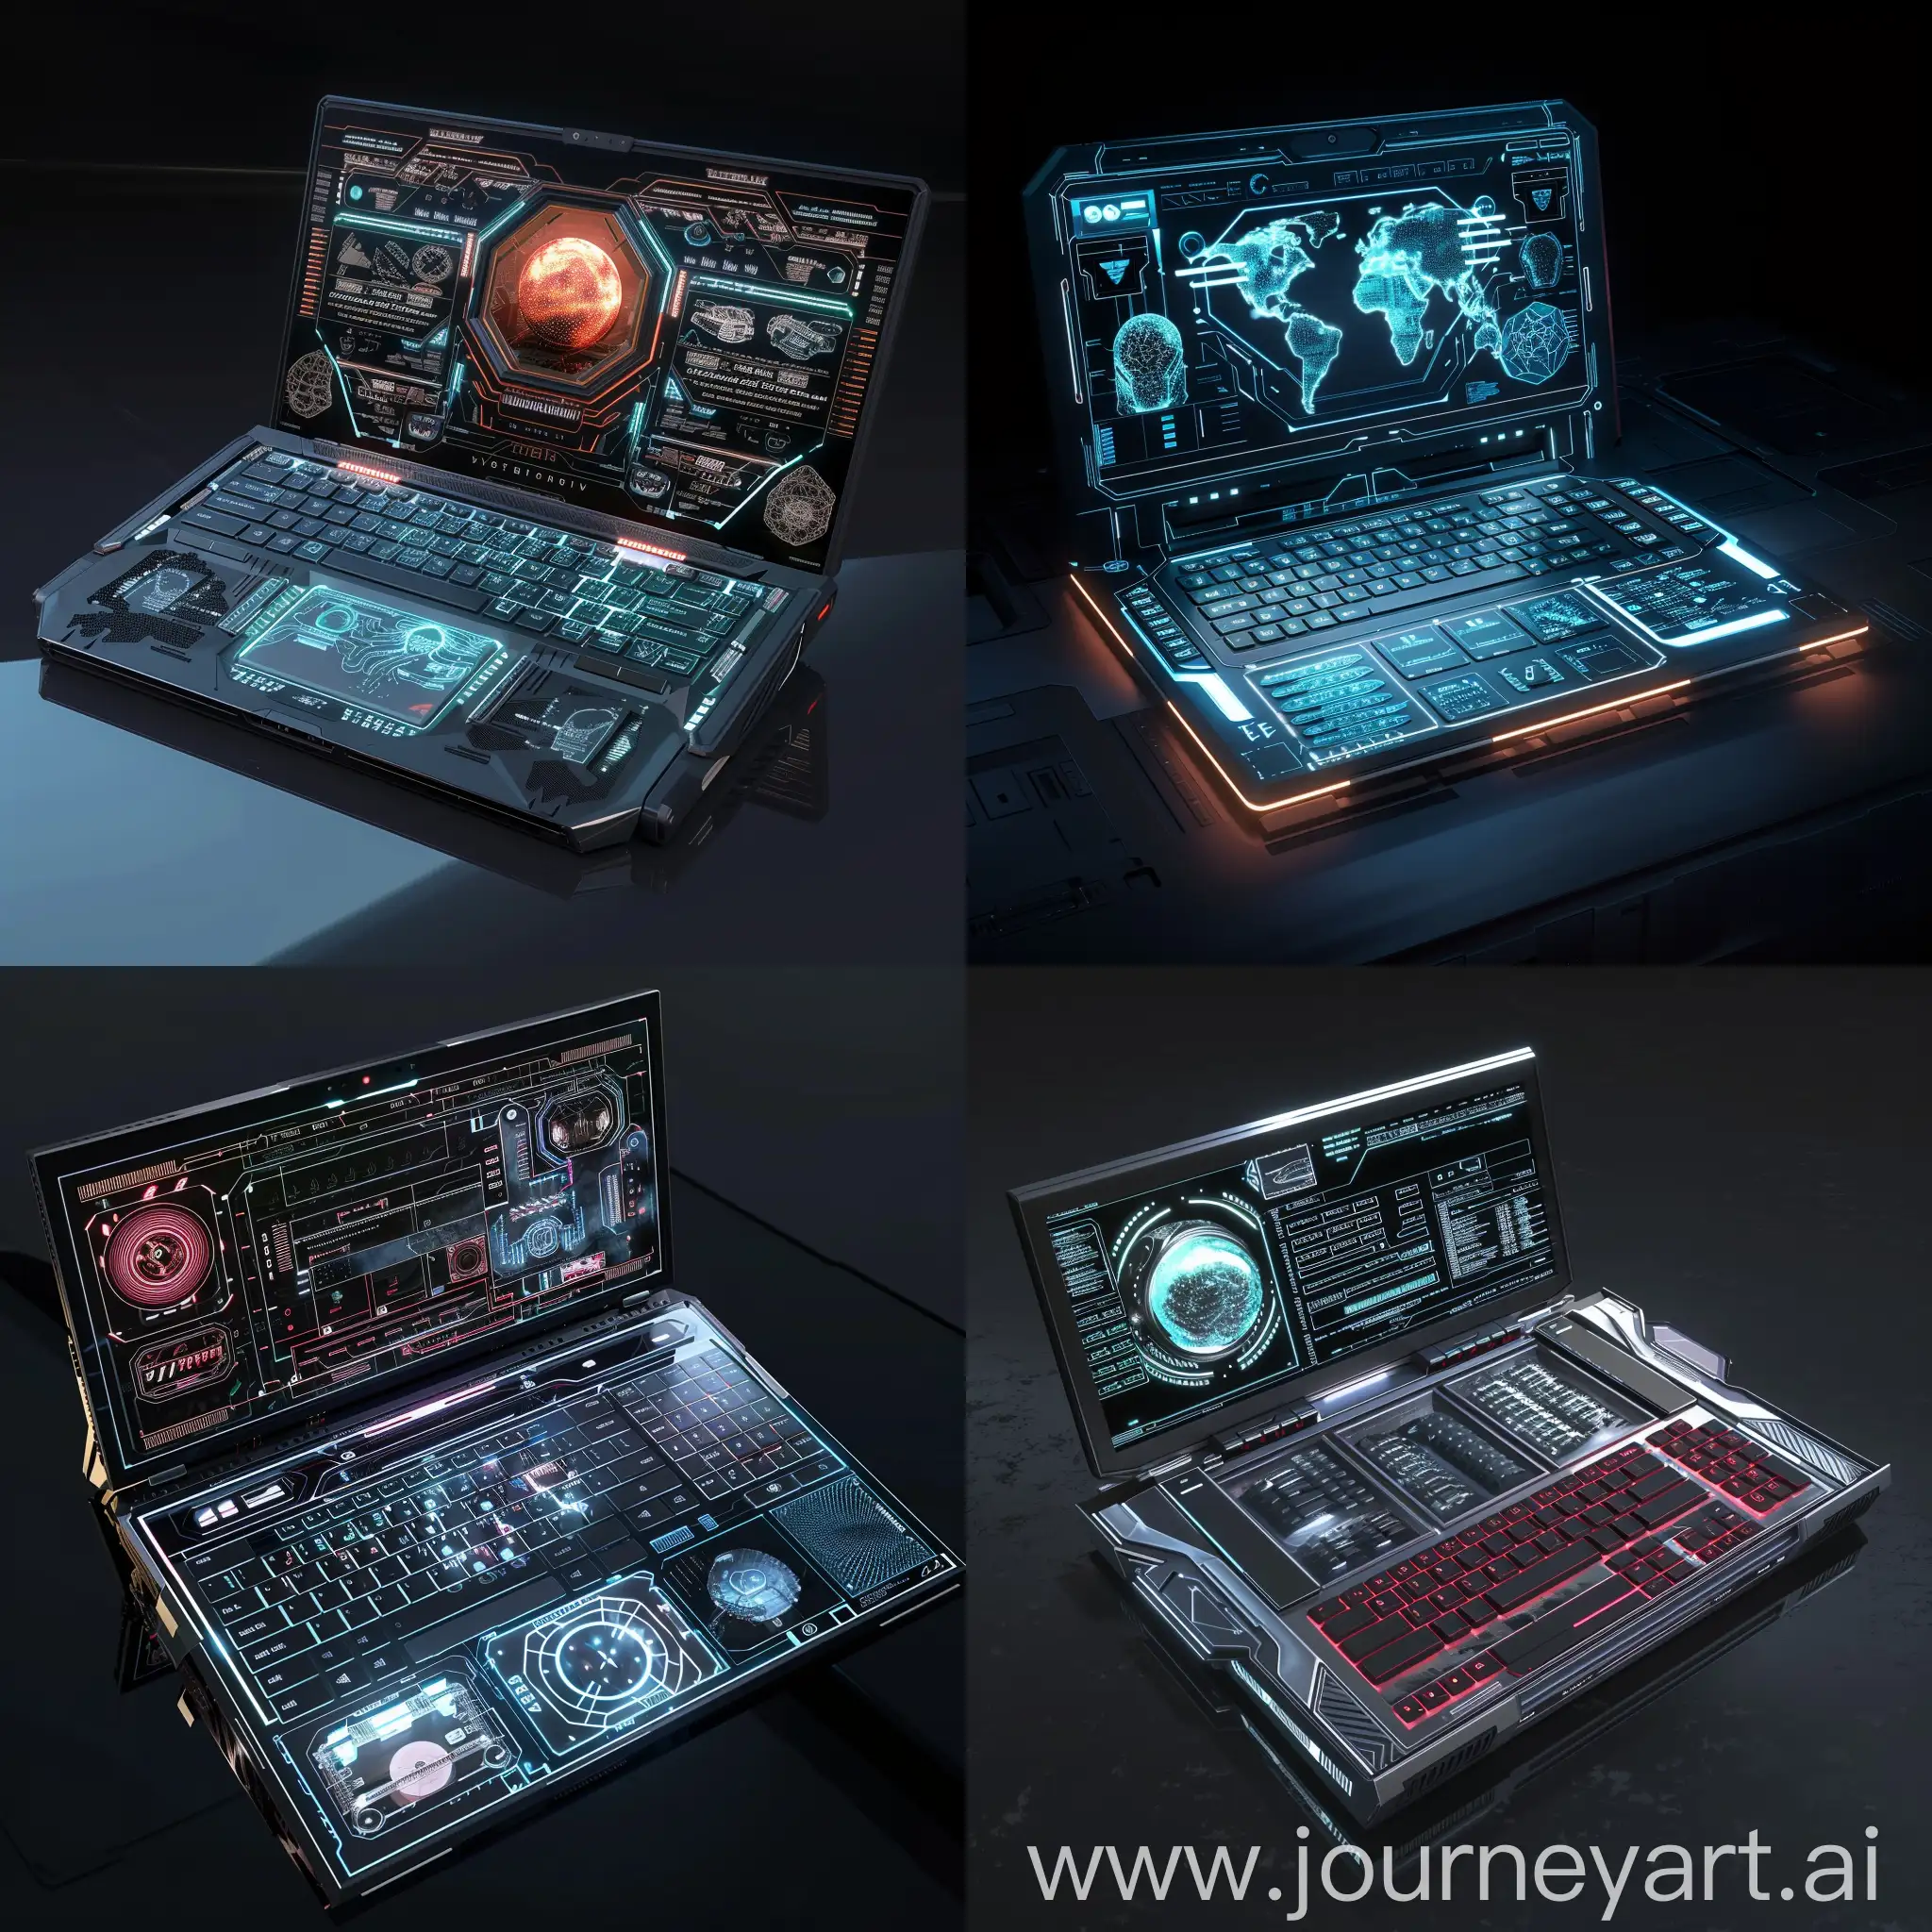 Futuristic-Laptop-with-Biometric-Authentication-and-SelfRepair-Technology